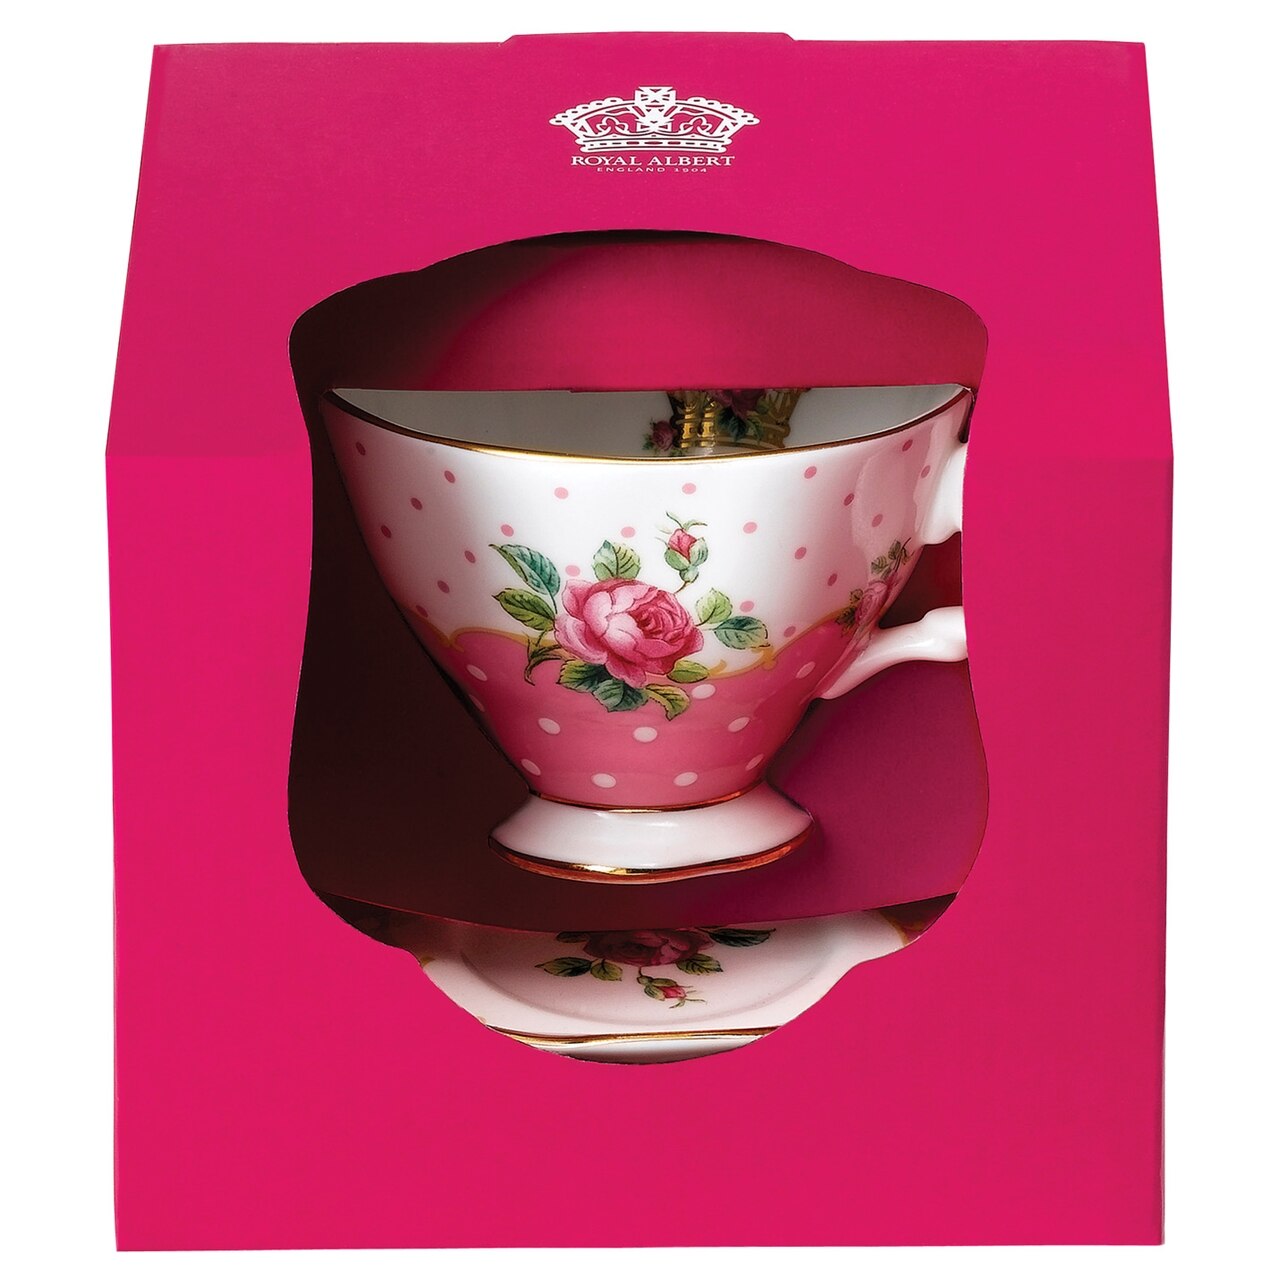 Royal Albert Cheeky Pink Vintage Teacup and Saucer Gift Boxed